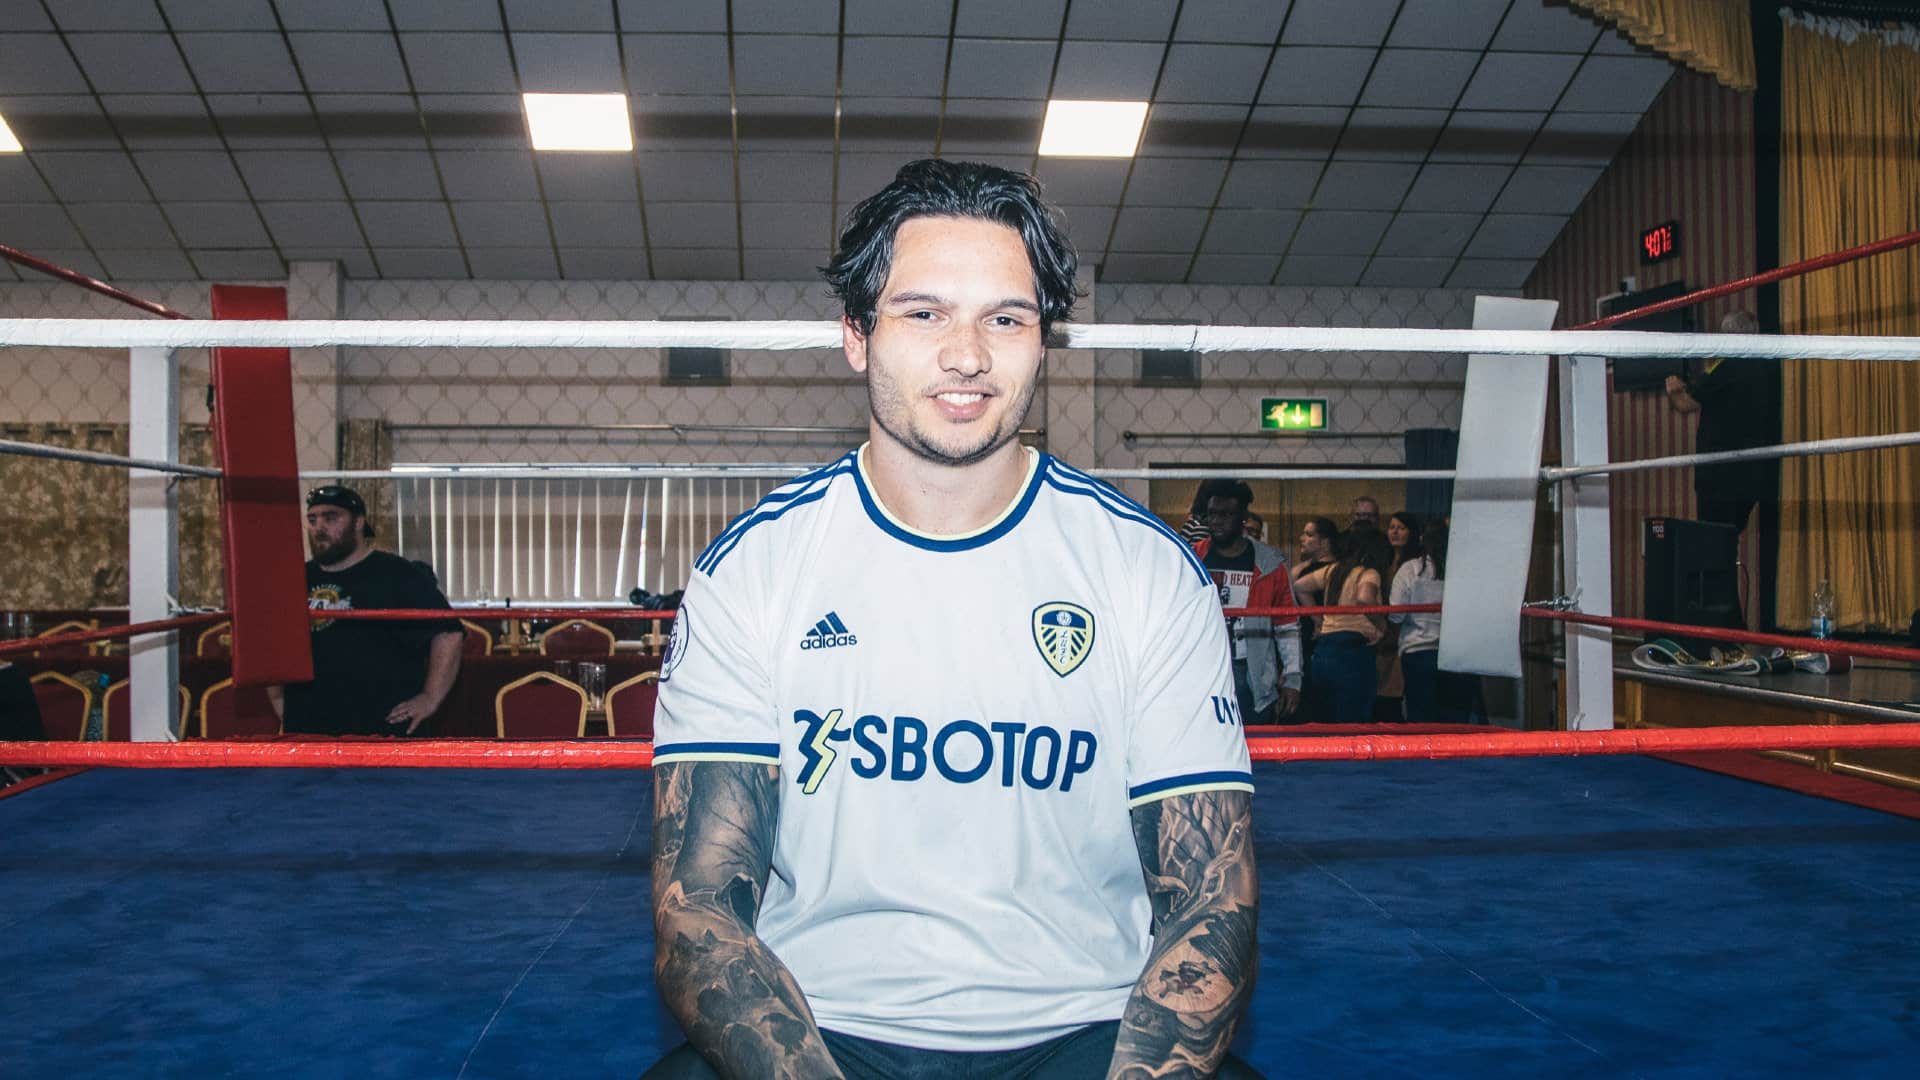 A photo of wrestler Joshua Kemper sitting on the ring apron wearing the 22-23 Leeds home shirt after the Battle of Belle Isle